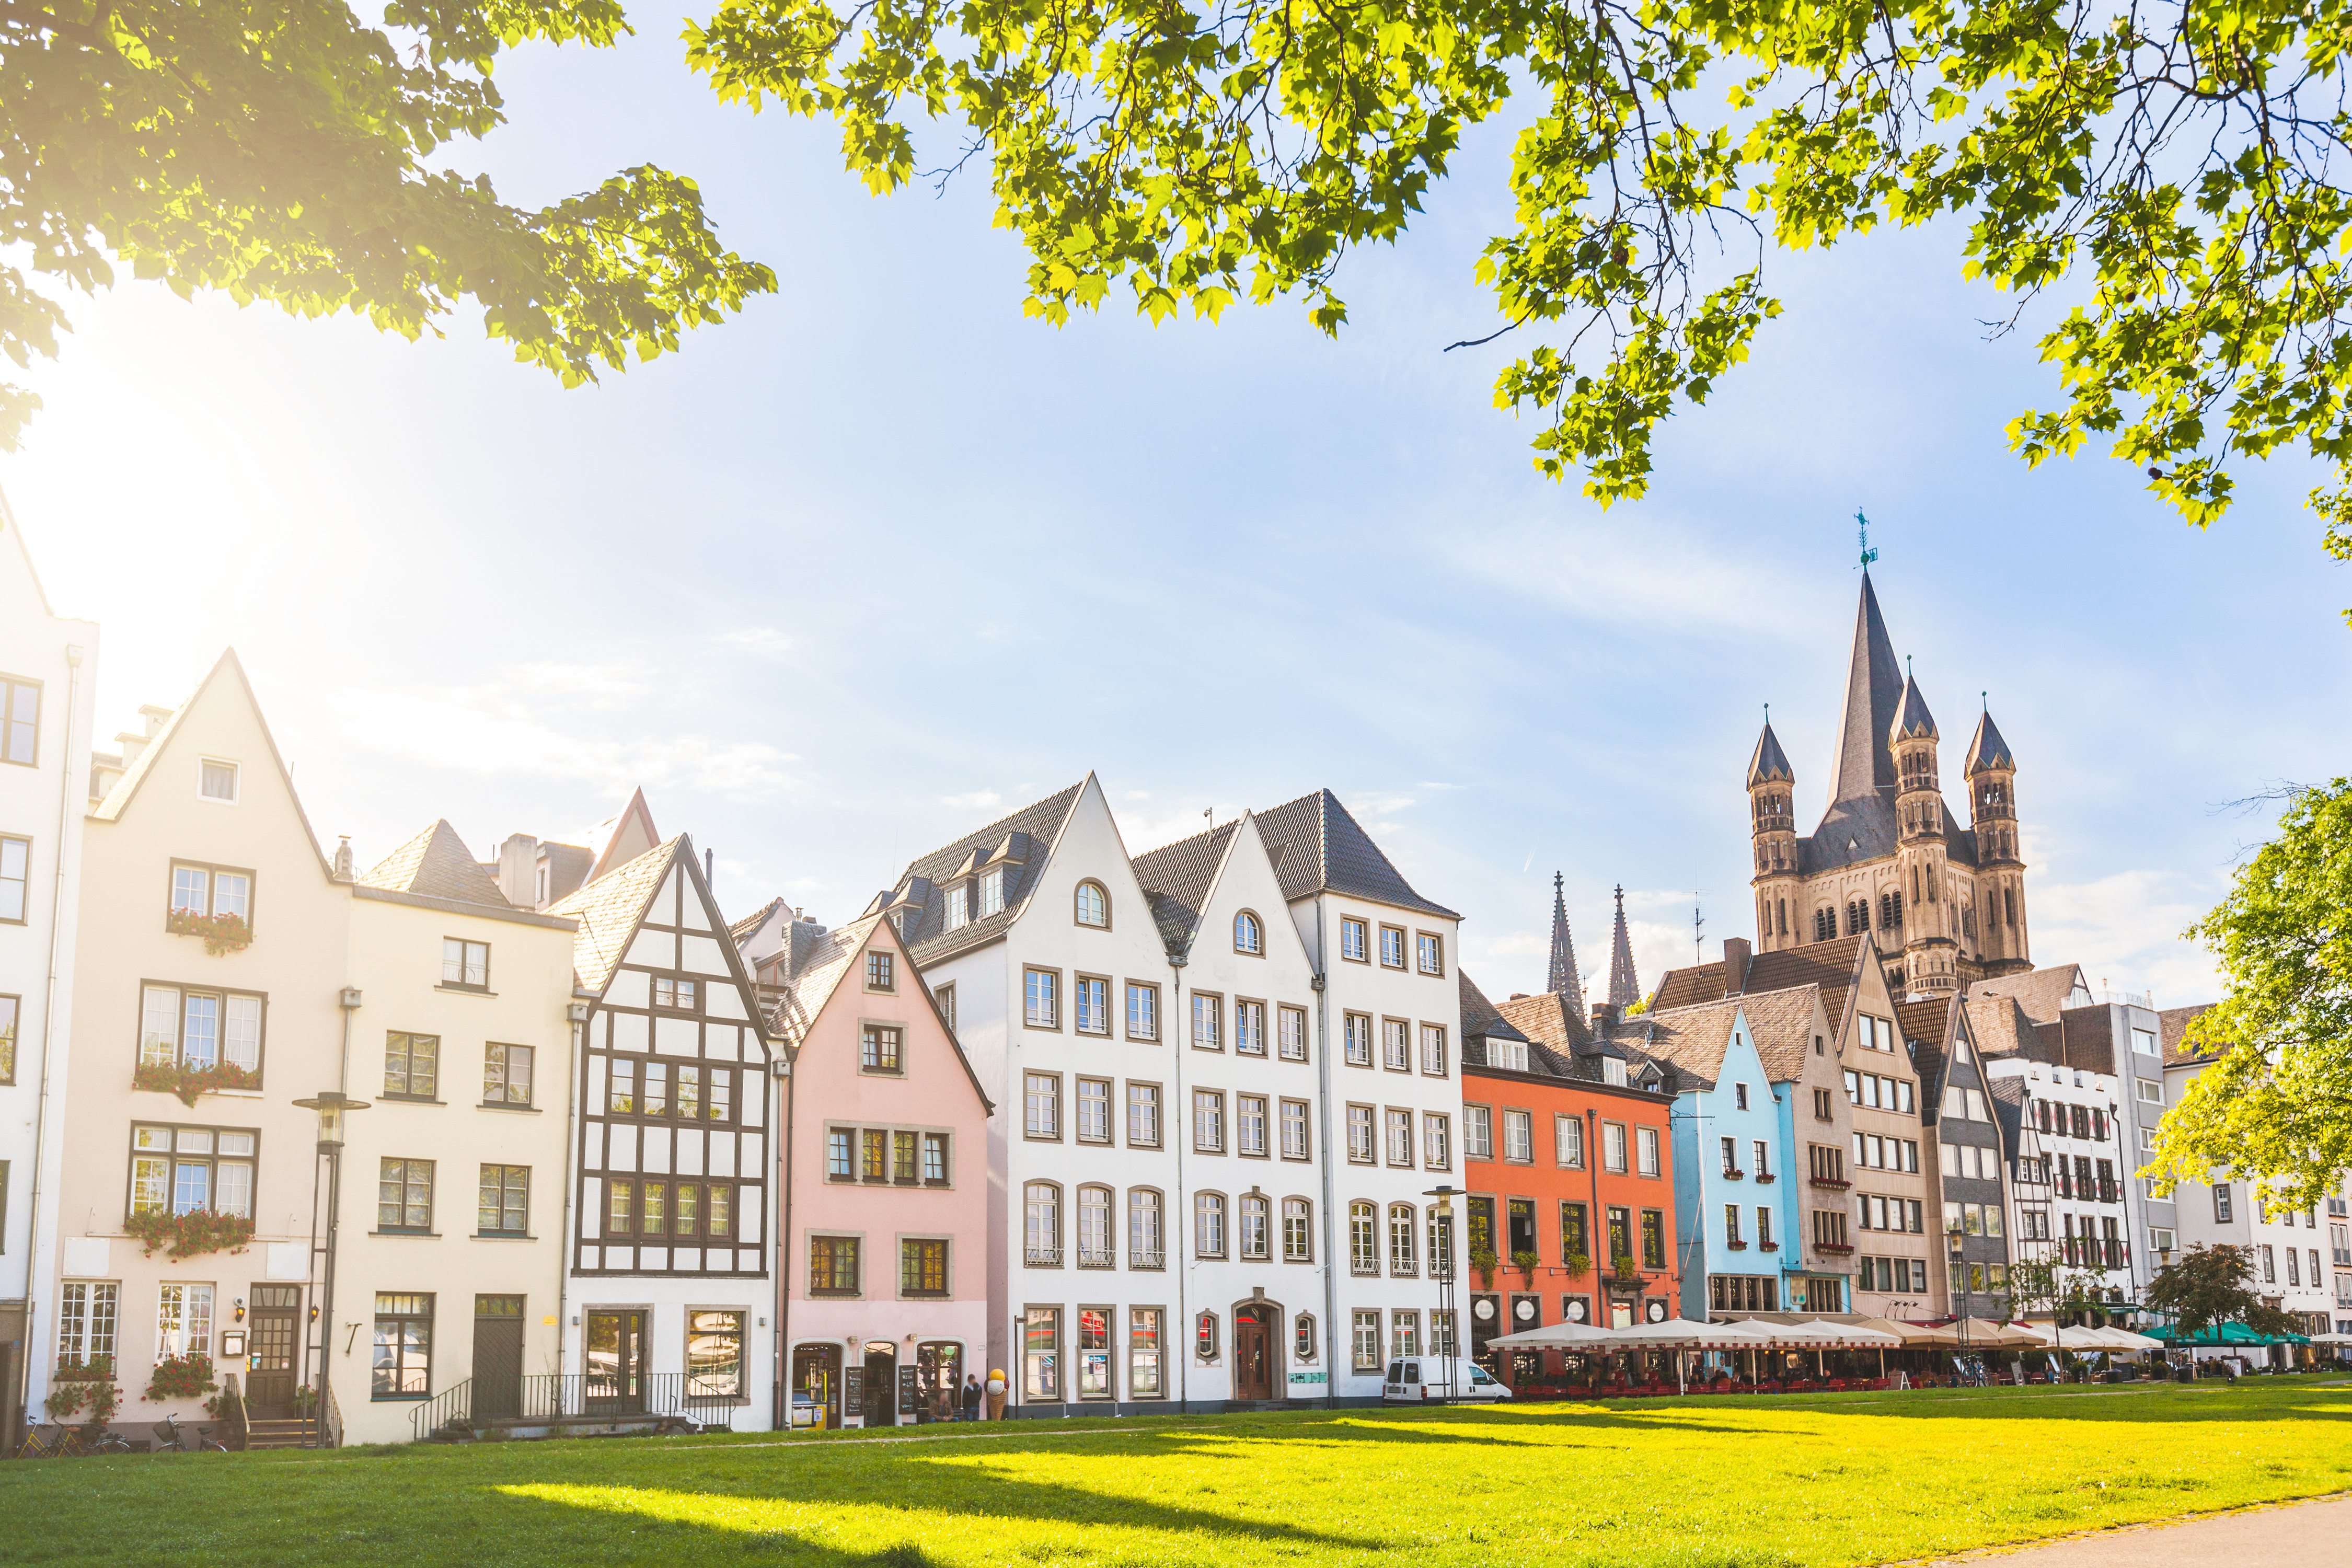 Houses and park in Cologne, Germany. Many of them are colourful, they are facing a public park with green grass and some trees. There is a bell tower on background. Travel and architecture concepts.